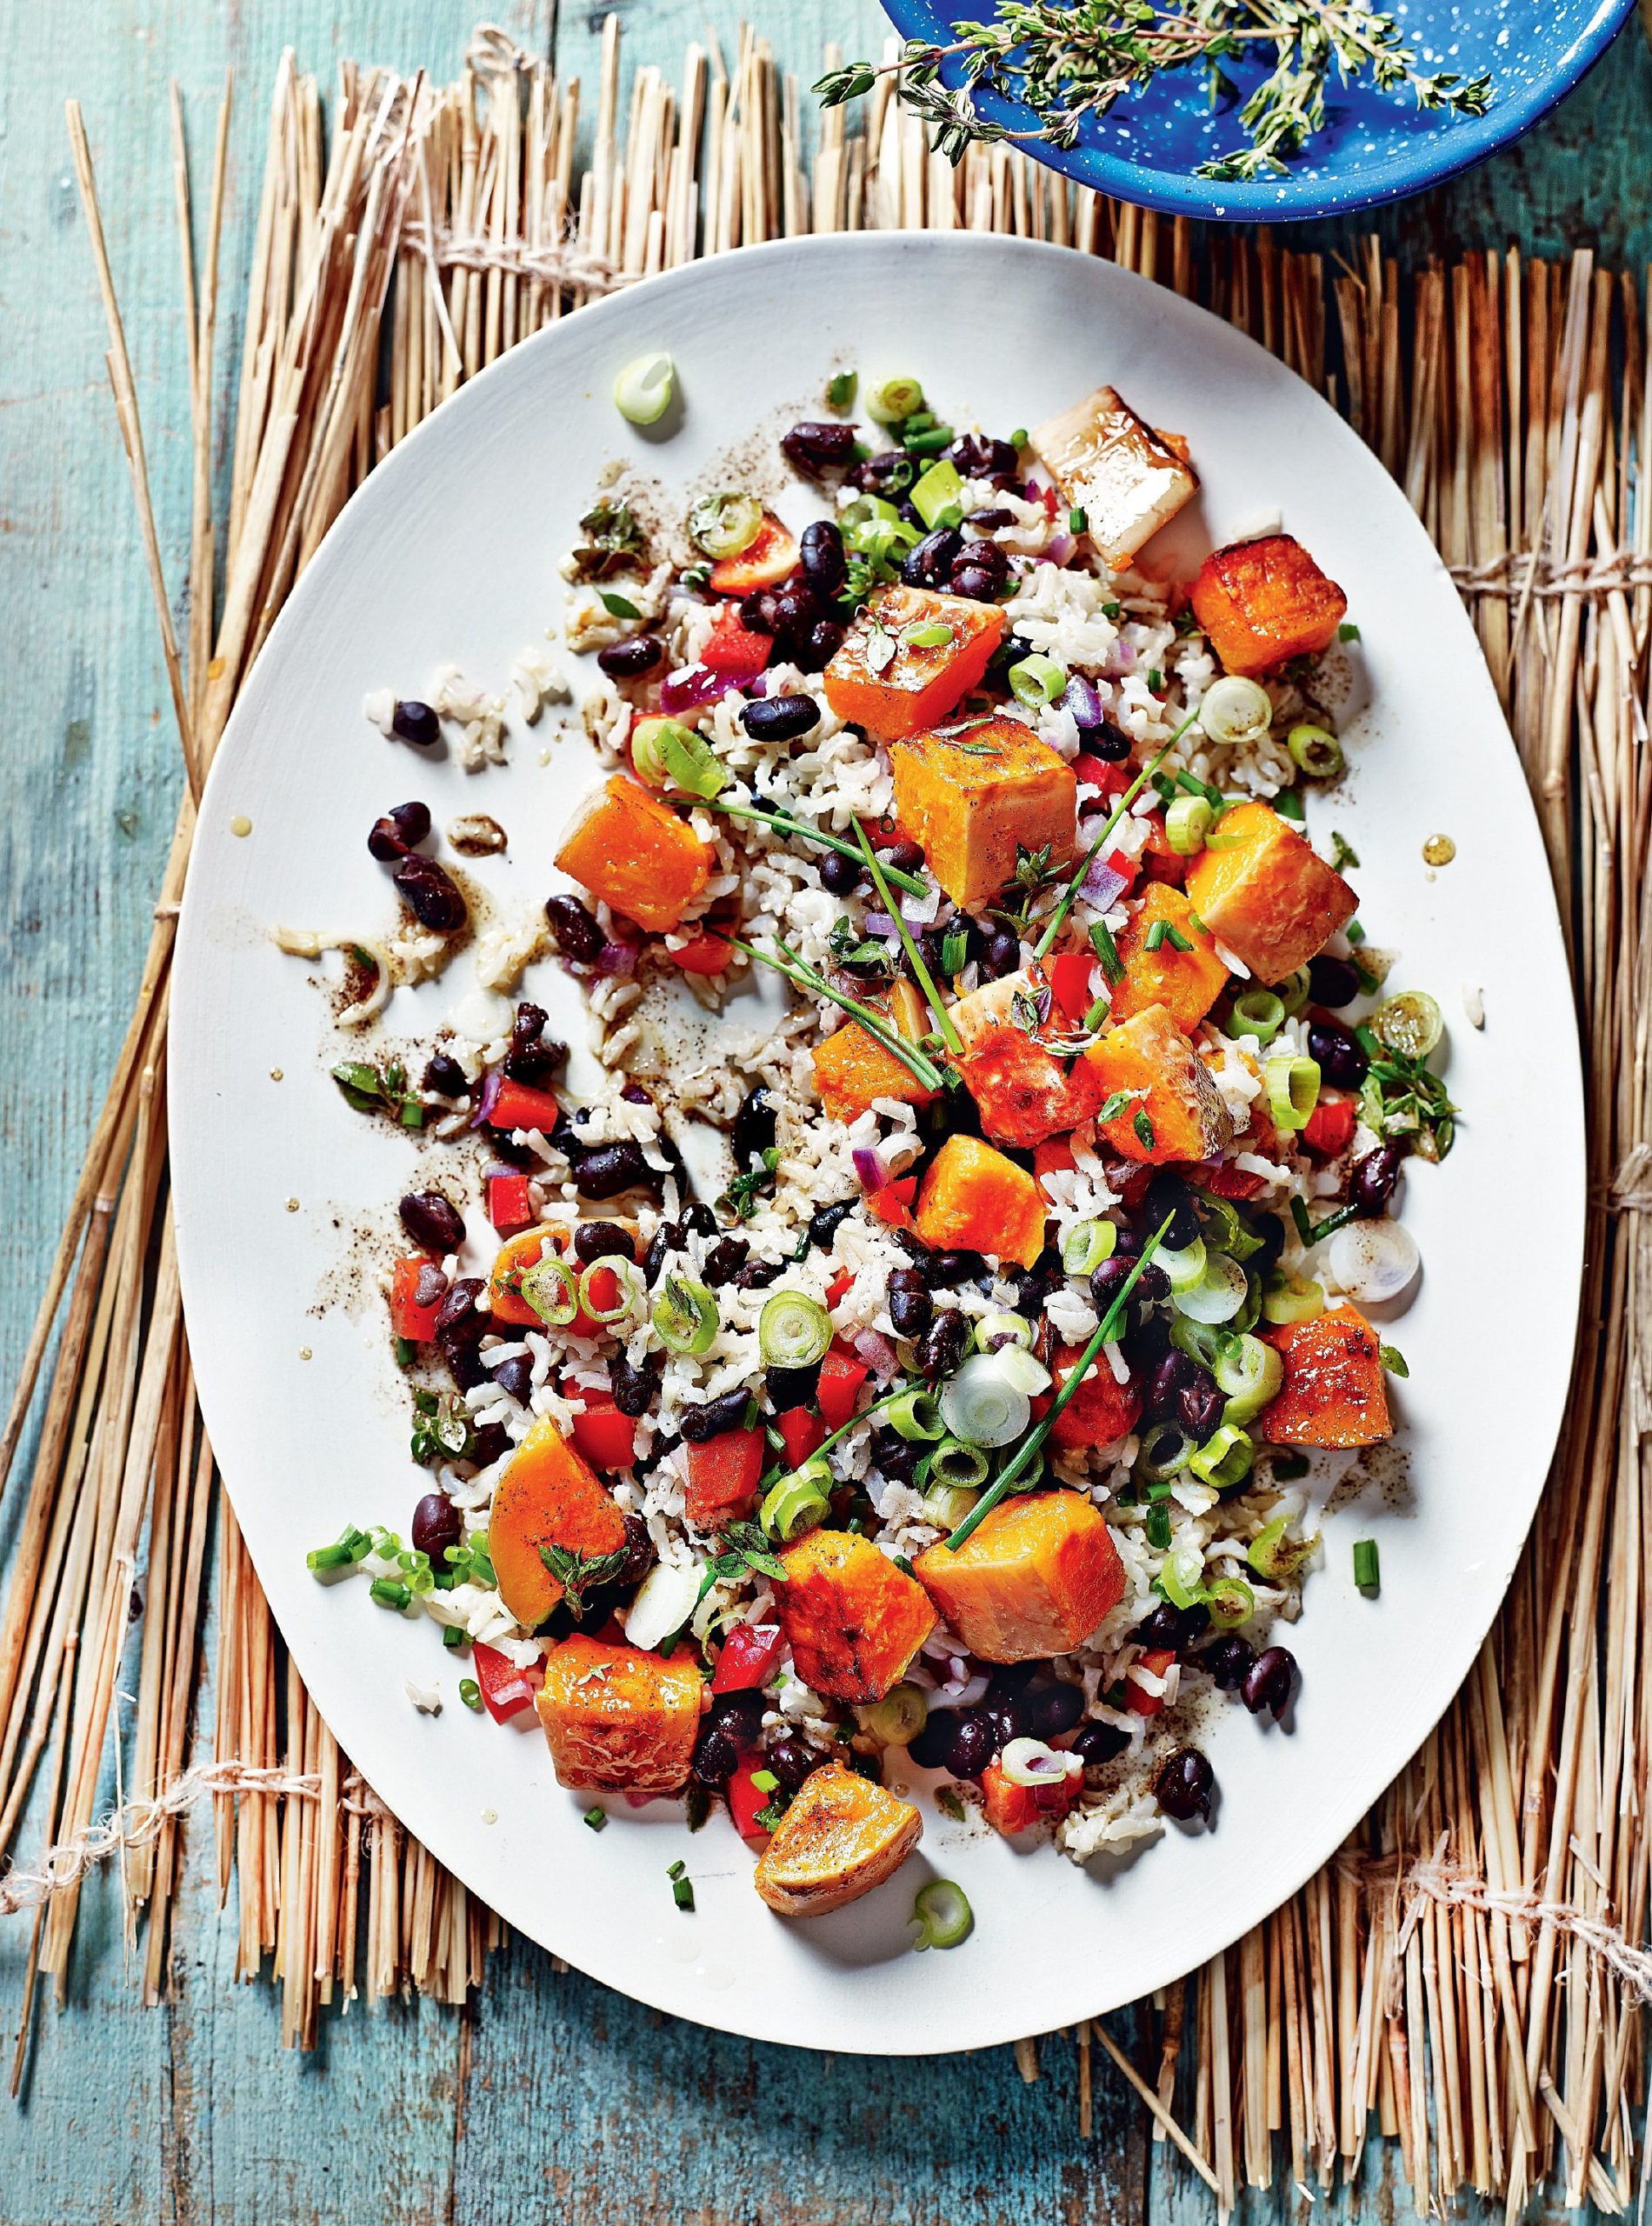 Caribbean Allspice Salad with Pumpkin and Black Beans